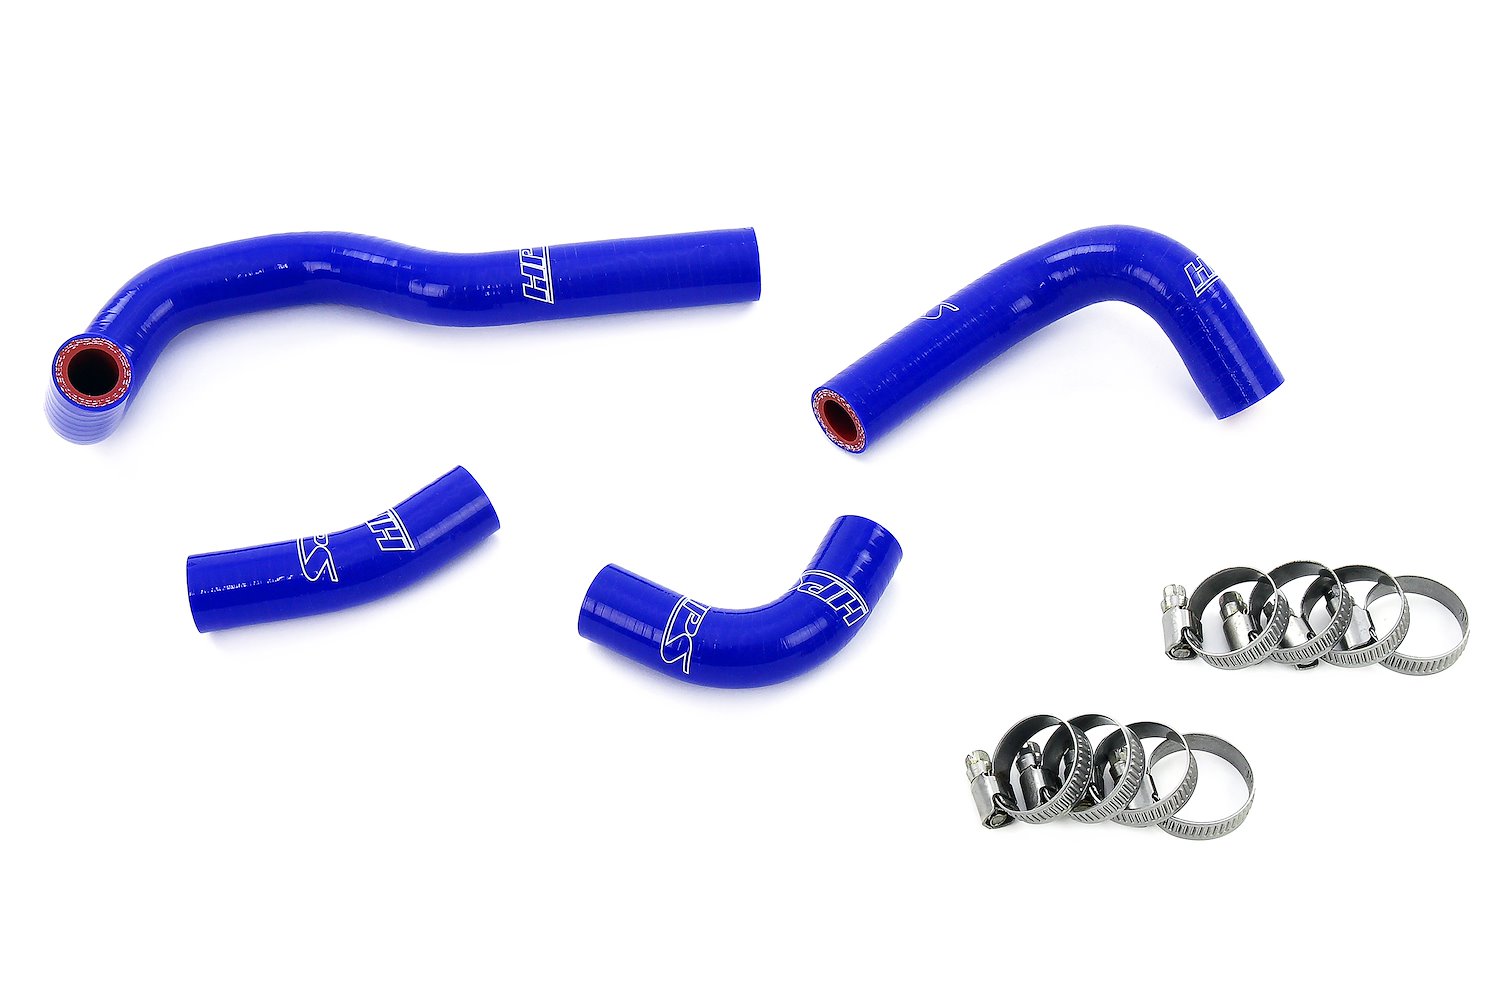 57-2146-BLUE Heater Hose Kit, 3-Ply Reinforced Silicone, Replaces Rubber Heater Coolant Hoses